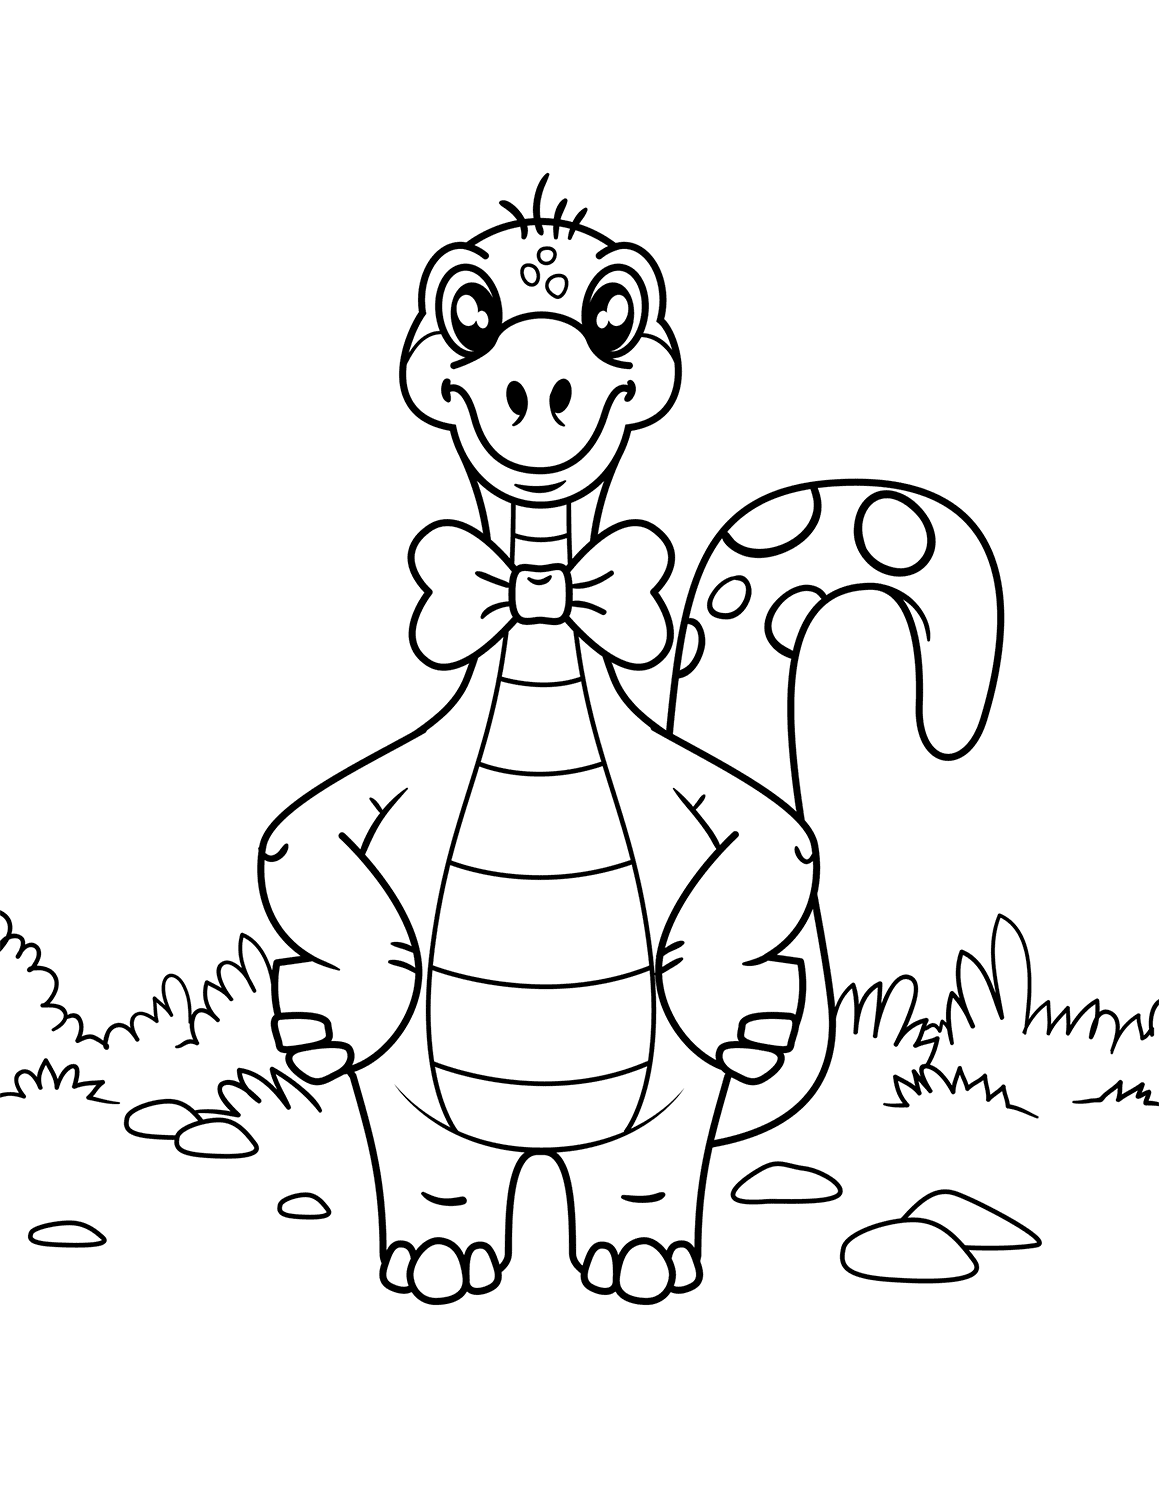 Dinosaur wearing bow tie Coloring Pages